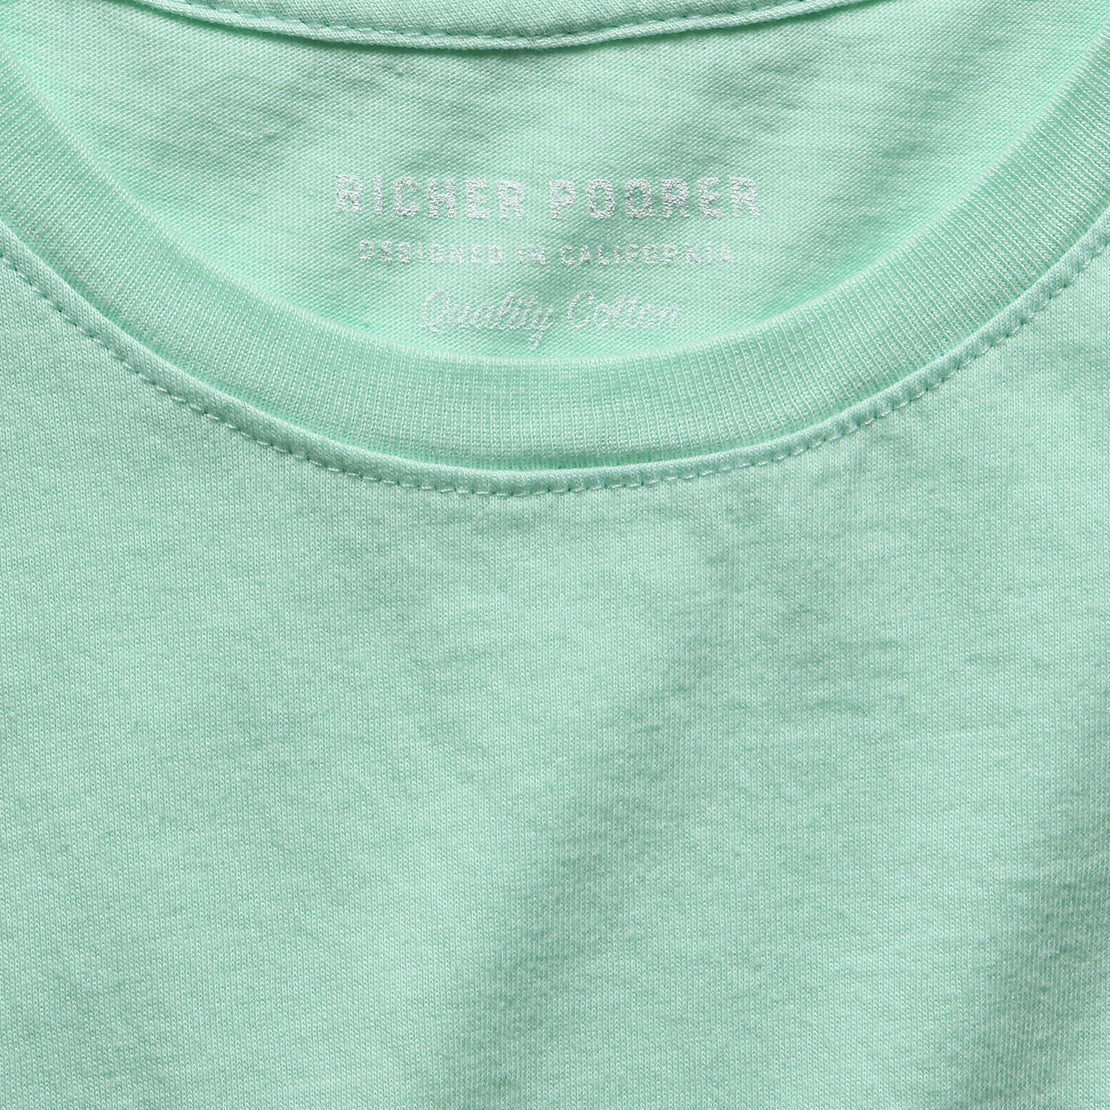 Muscle Tank - Mint - Richer Poorer - STAG Provisions - W - Tops - Sleeveless